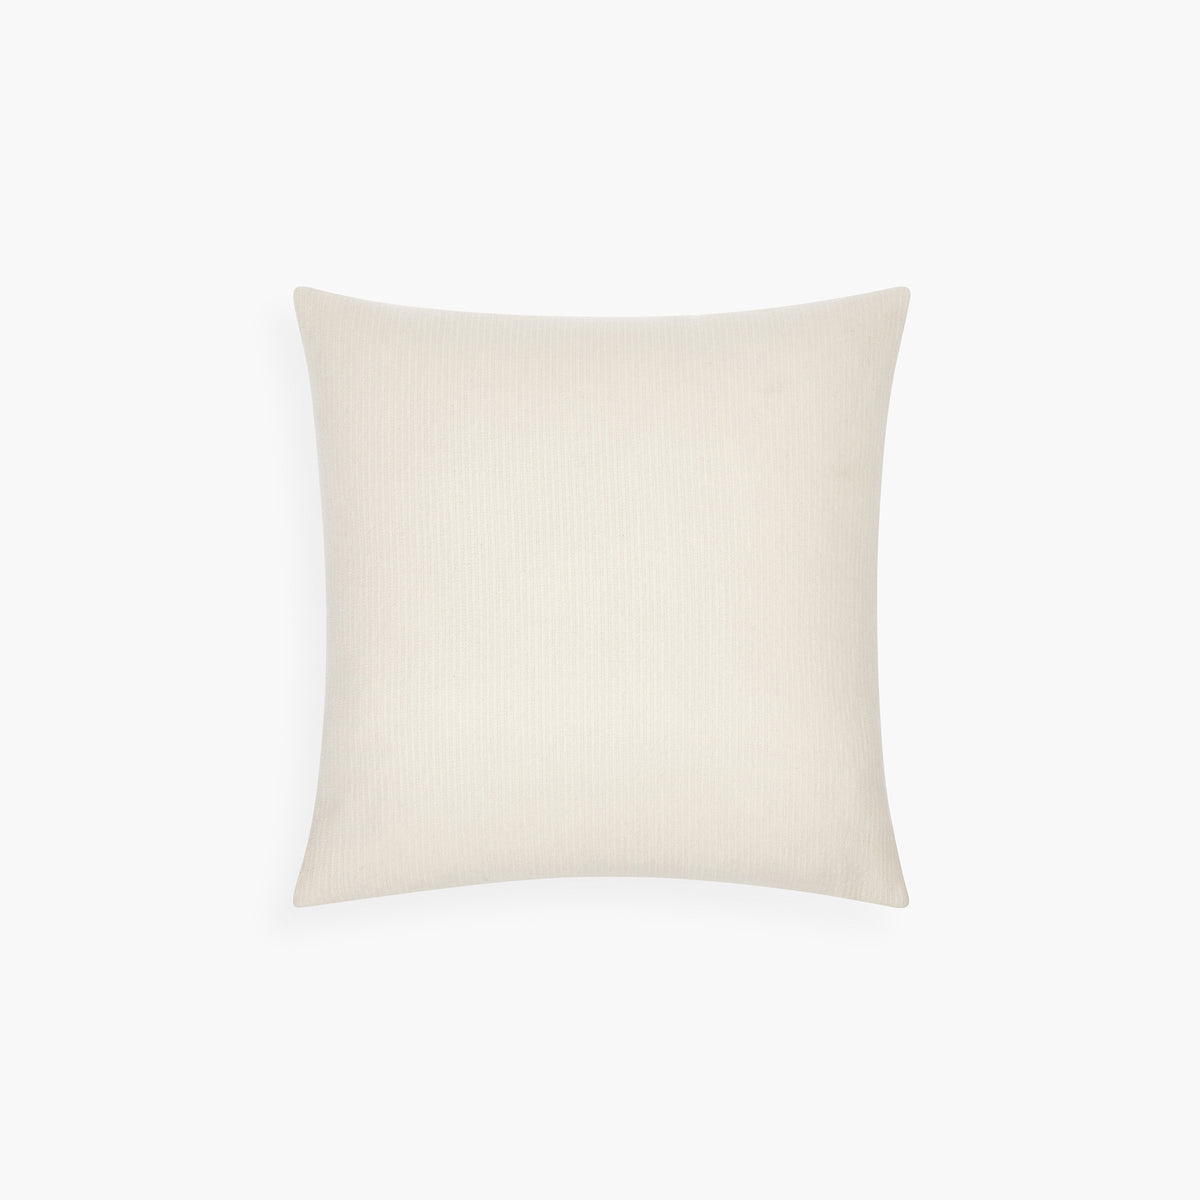 Small Haven 18 Square Decorative Throw Pillow